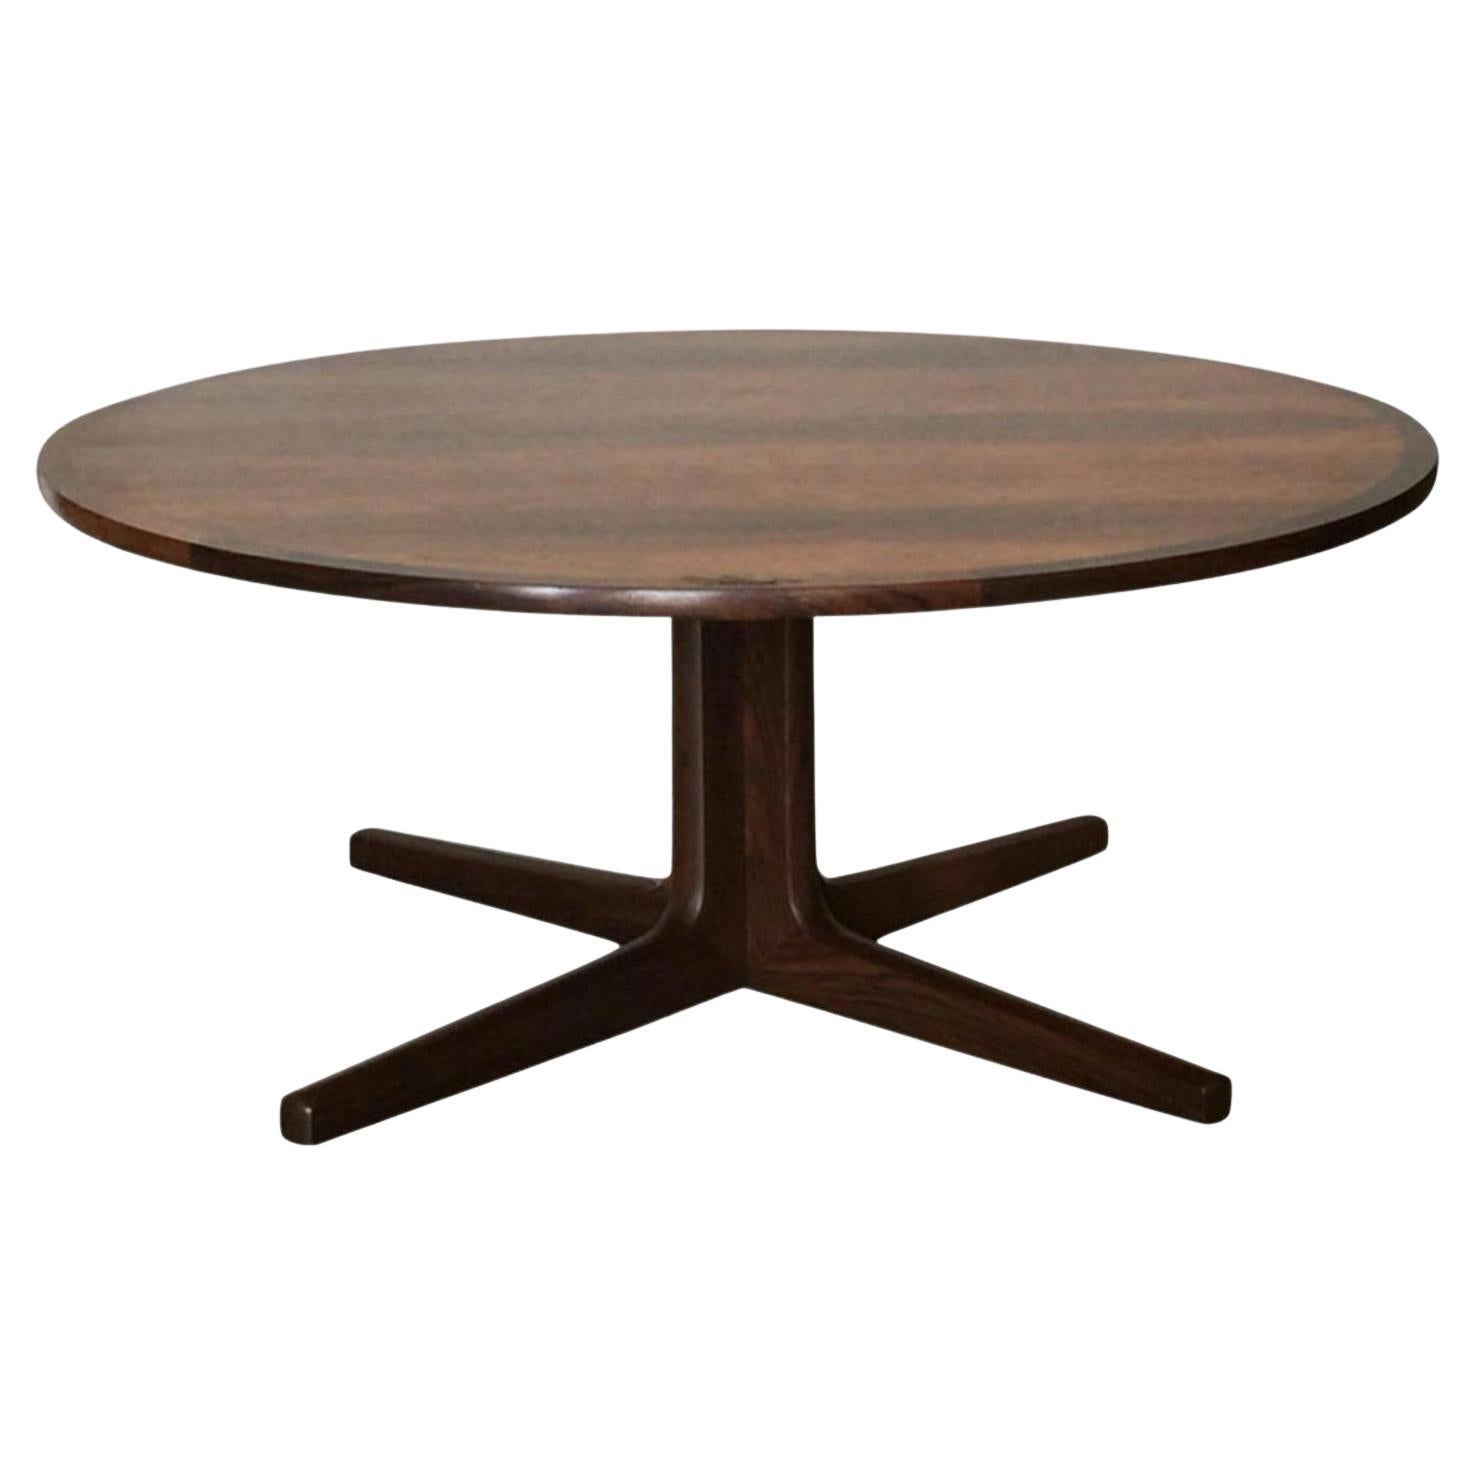 Impeccable Hans C. Andersen Danish Rosewood Round Coffee Table